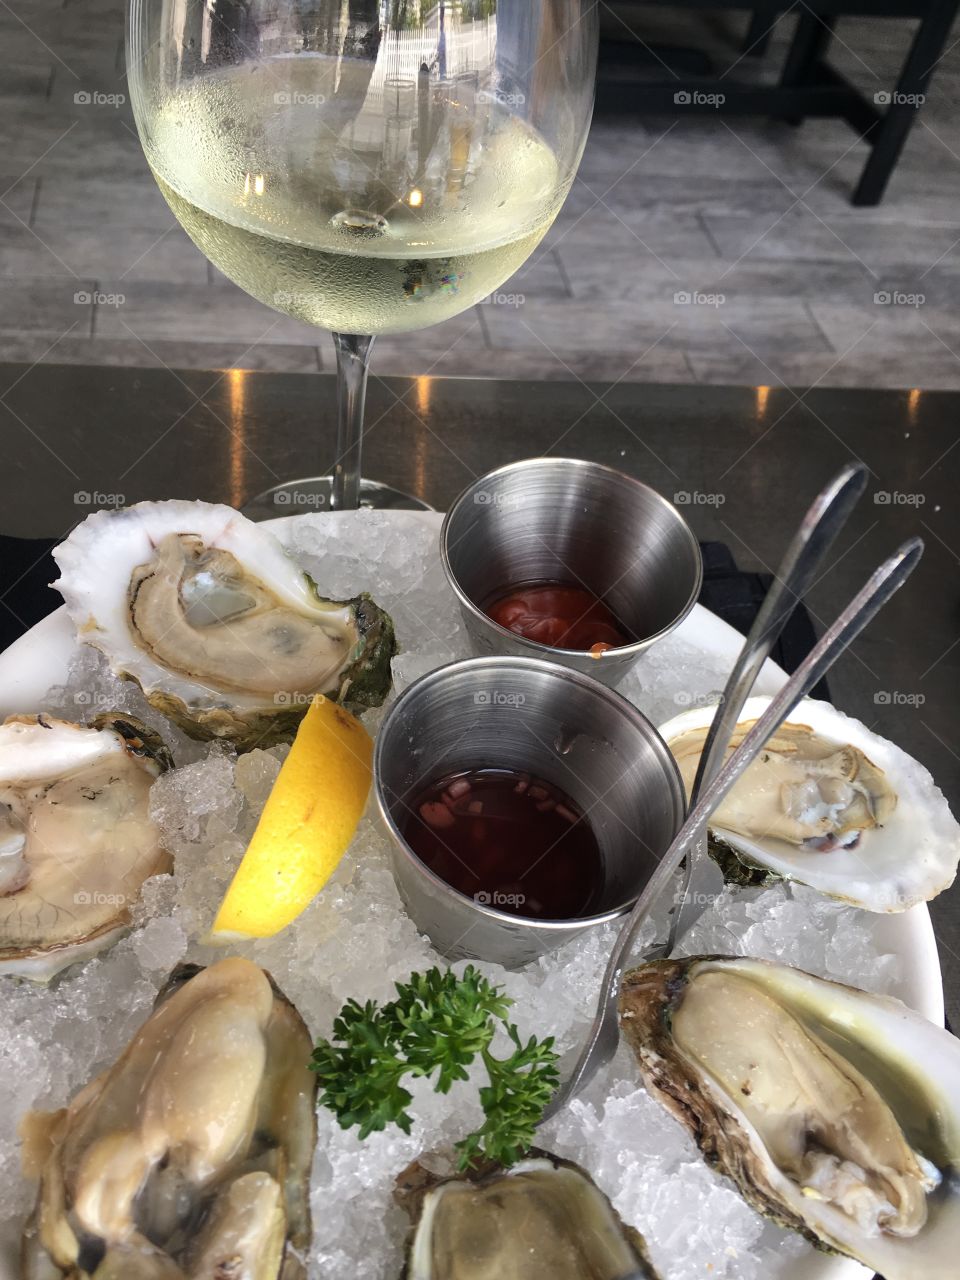 Oyster and wine